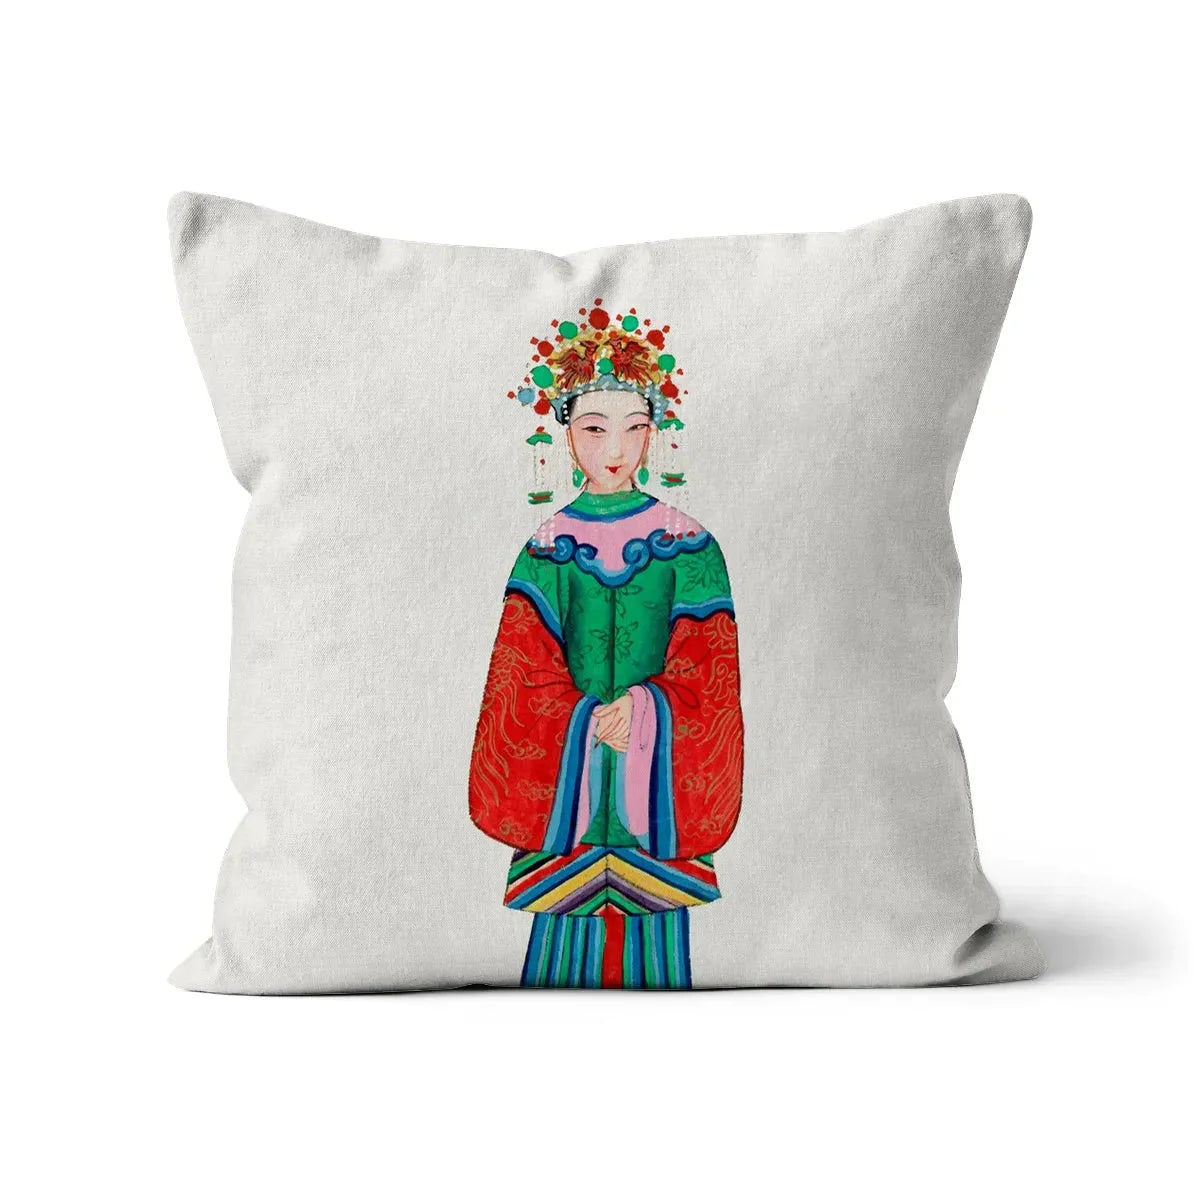 Chinese Imperial Princess Cushion - Linen / 16’x16’ - Throw Pillows - Aesthetic Art